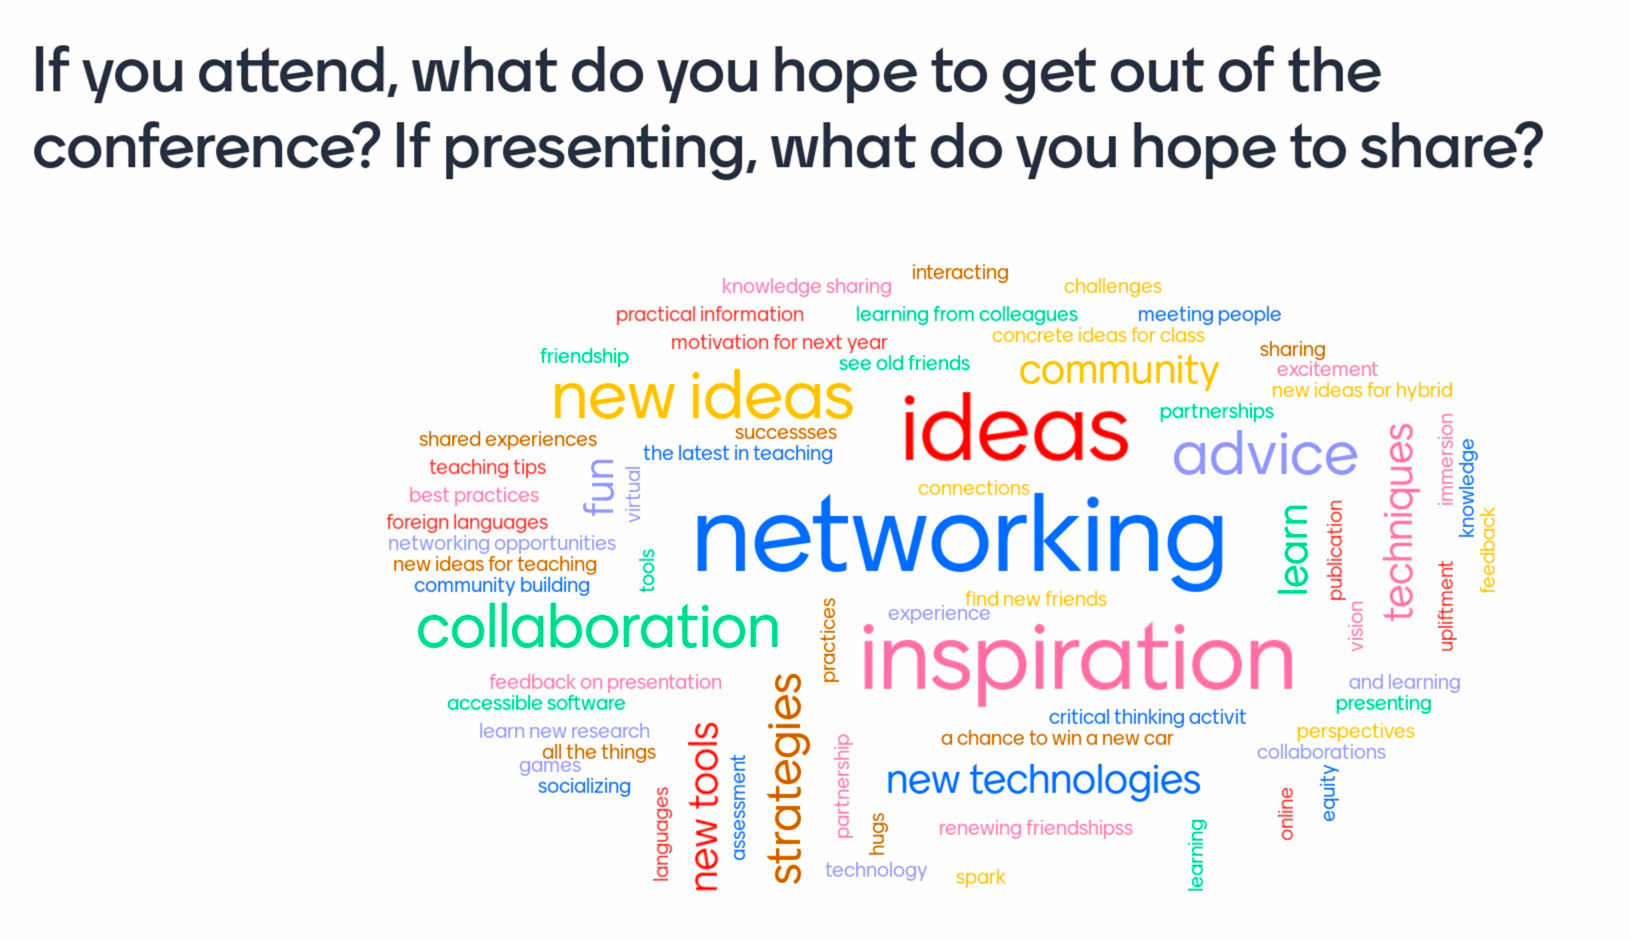 responses to what do you hope to get out of the conference. most popular answers: ideas, networking, inspiration